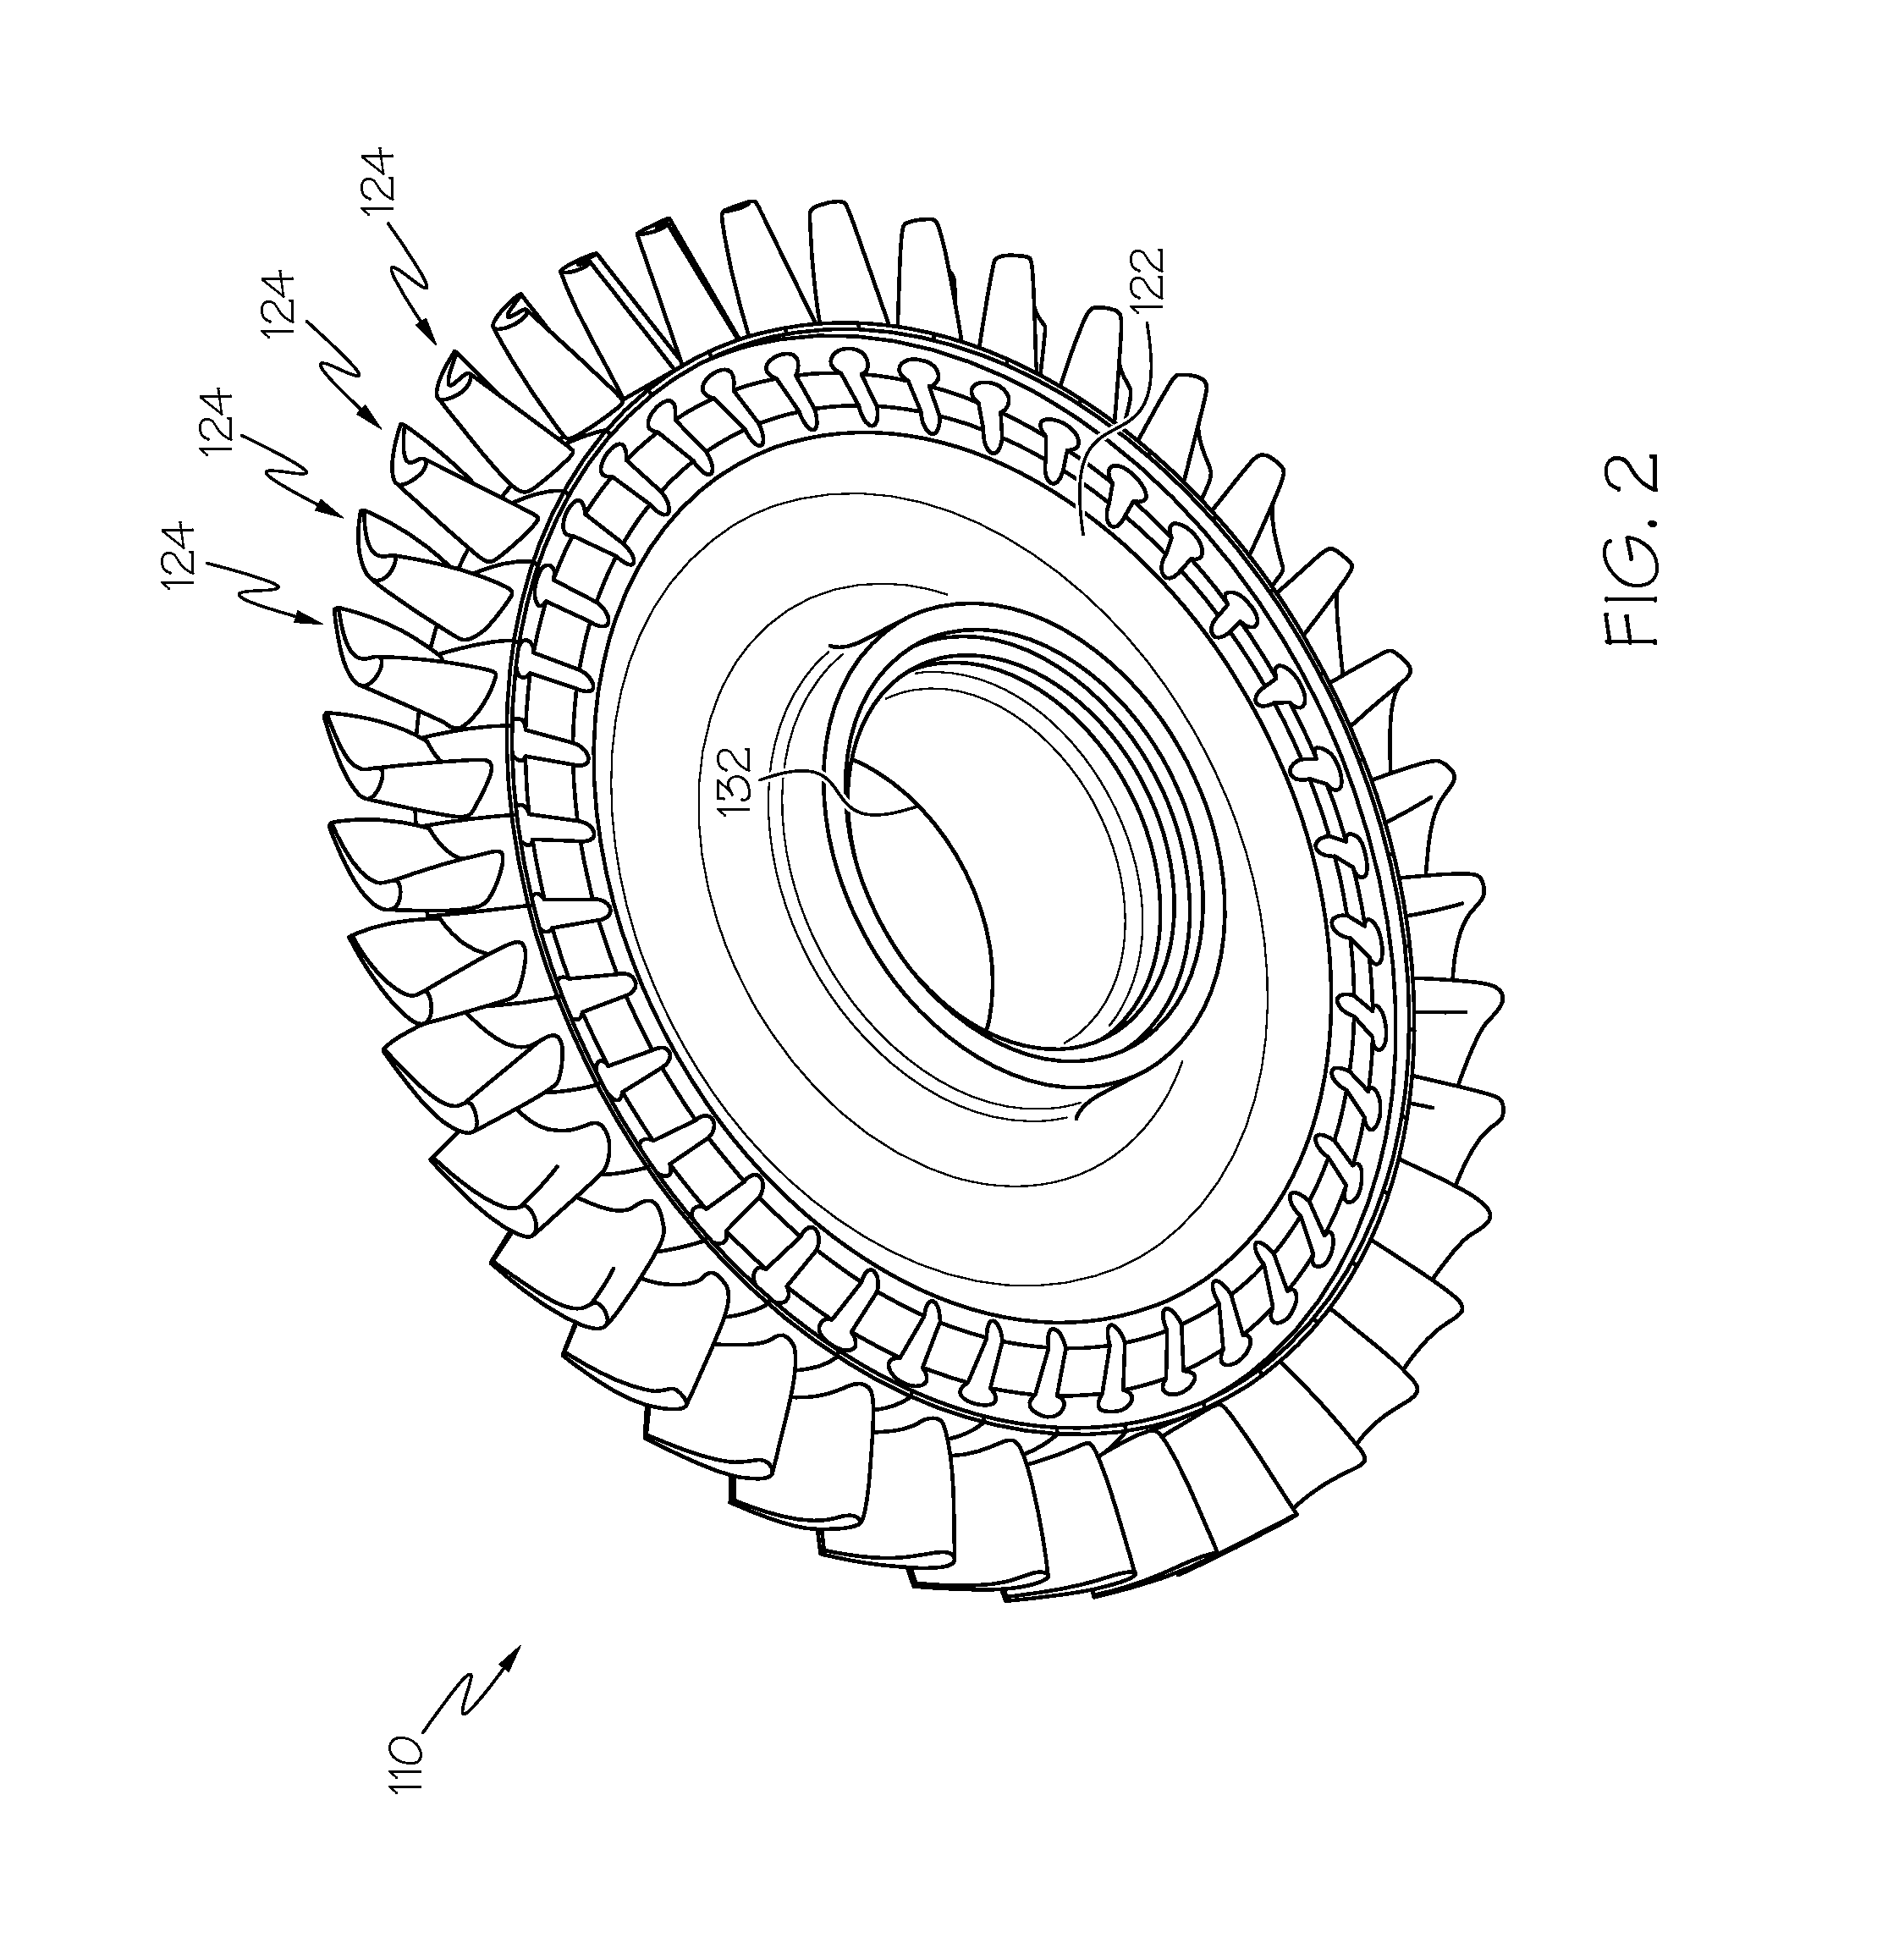 Hybrid bonded turbine rotors and methods for manufacturing the same